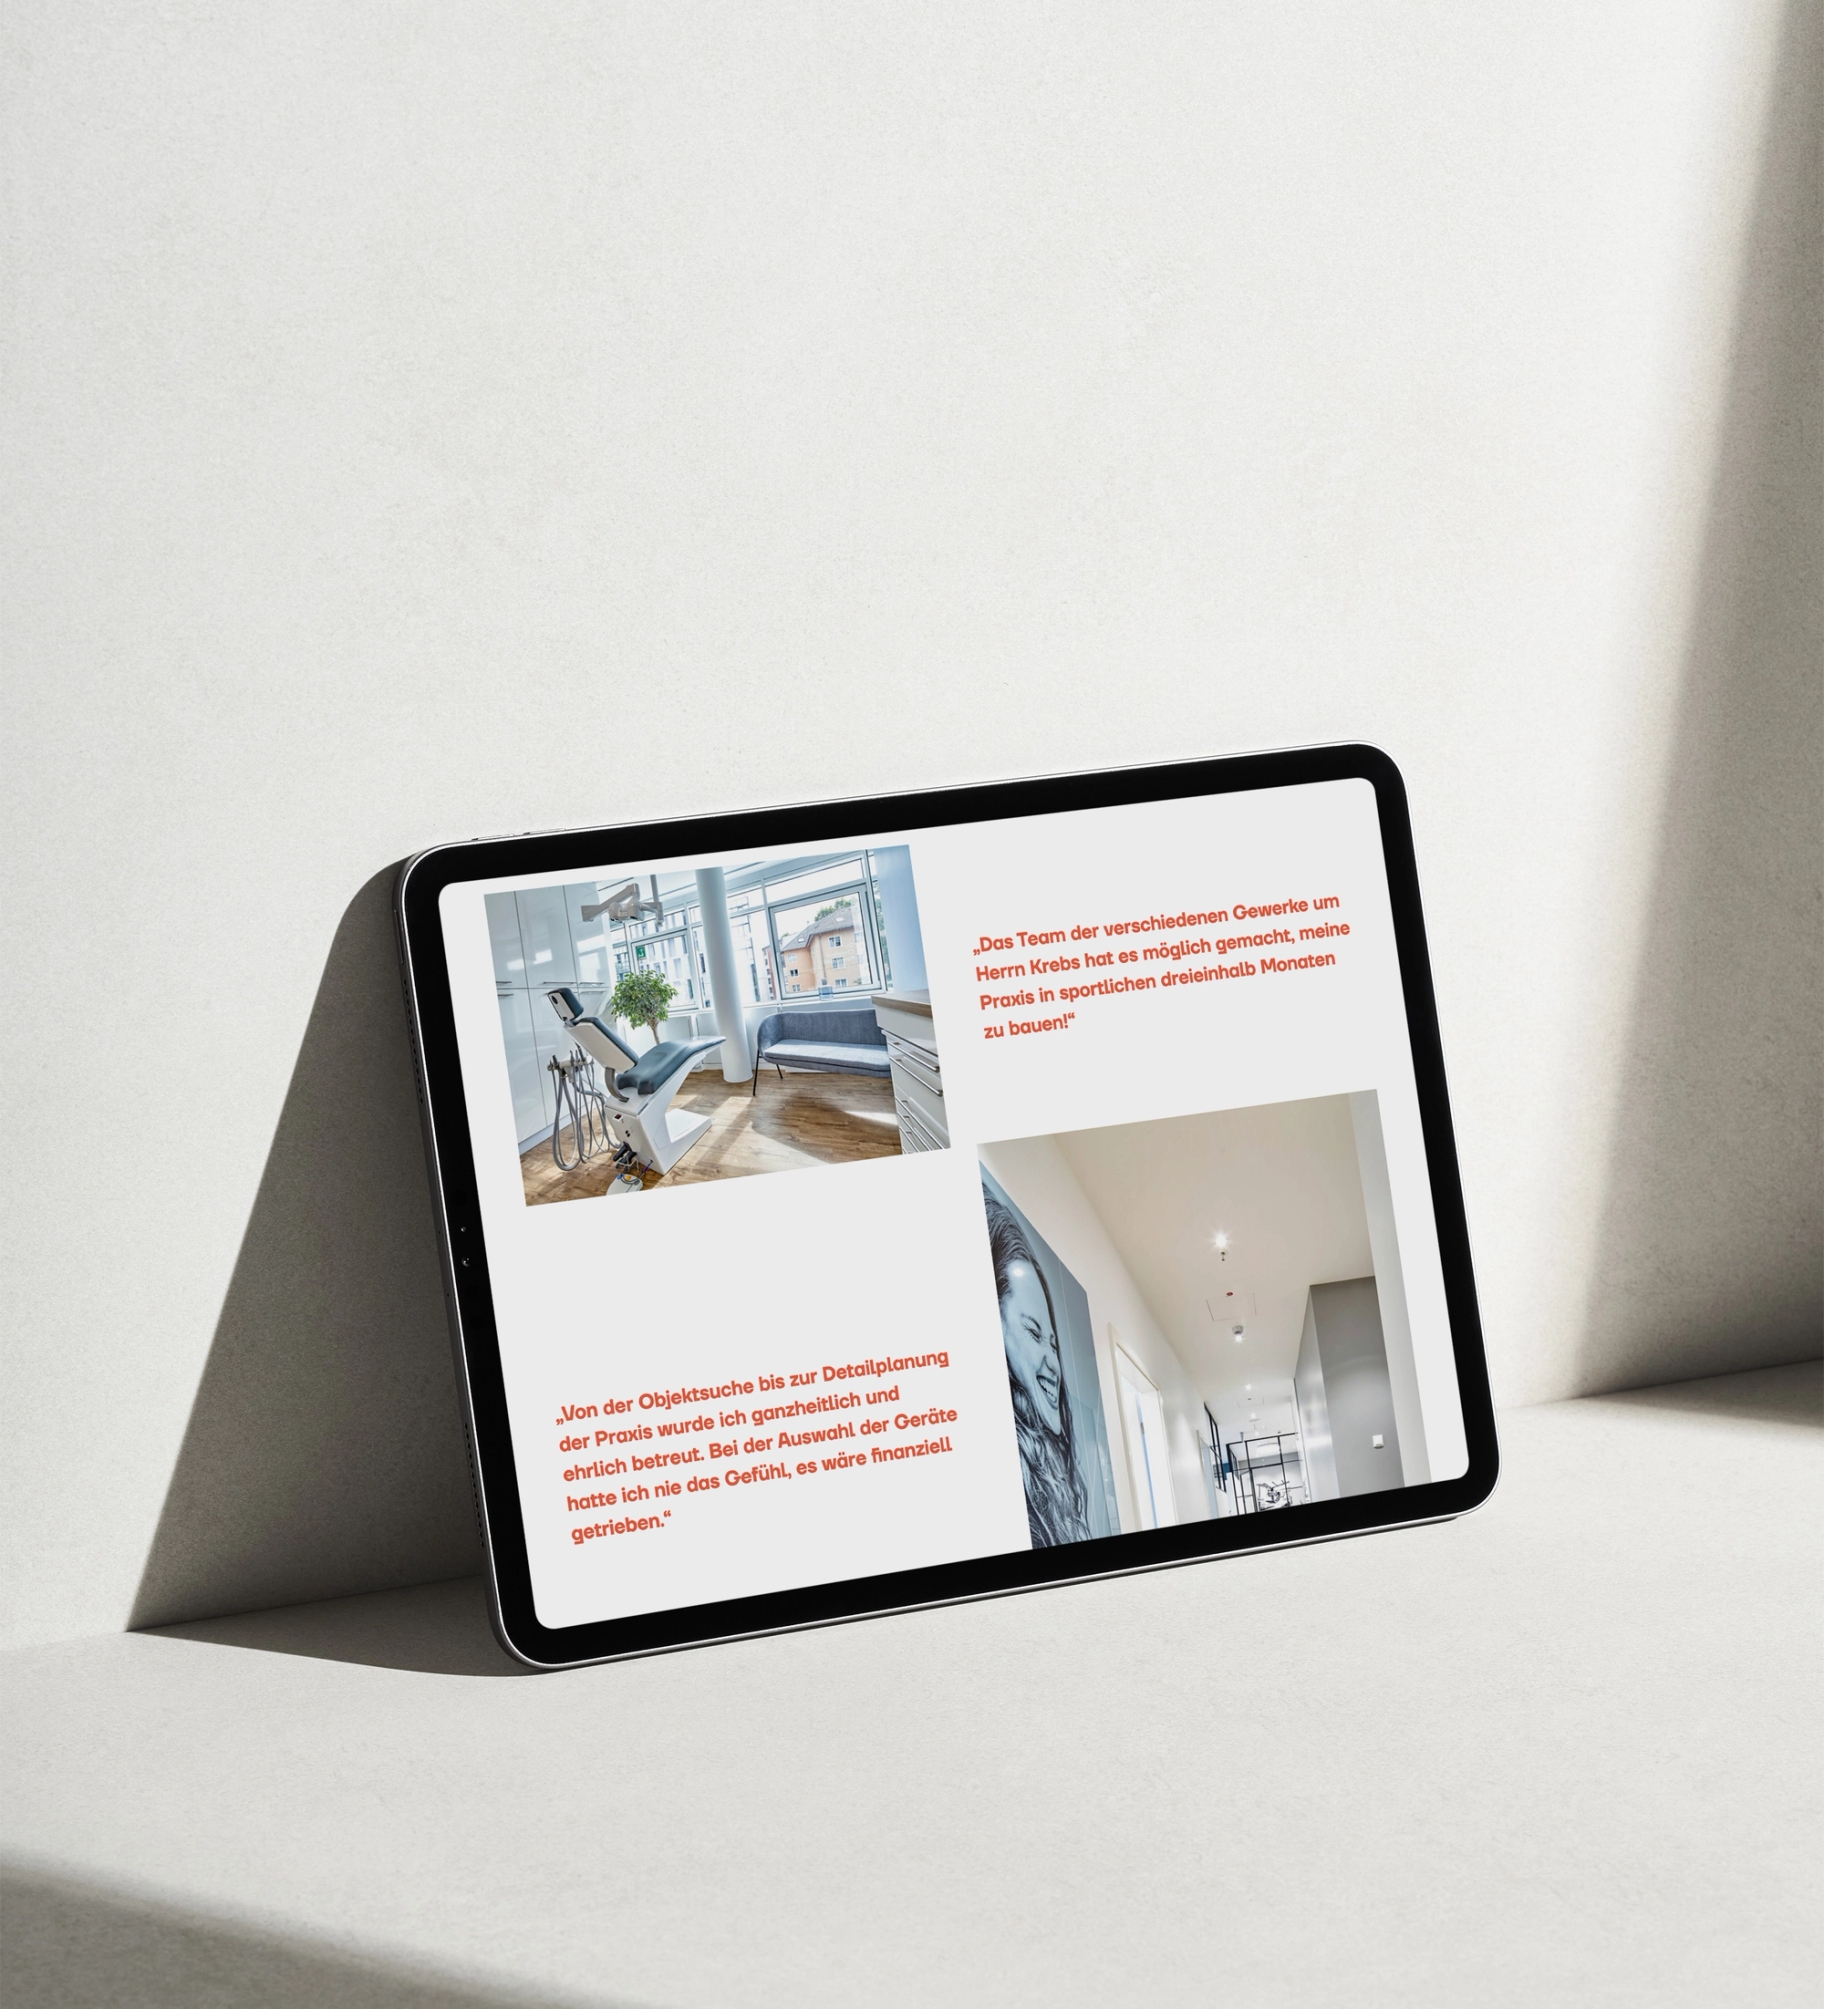 A tablet leaning against a white wall showing the Layout of the Website